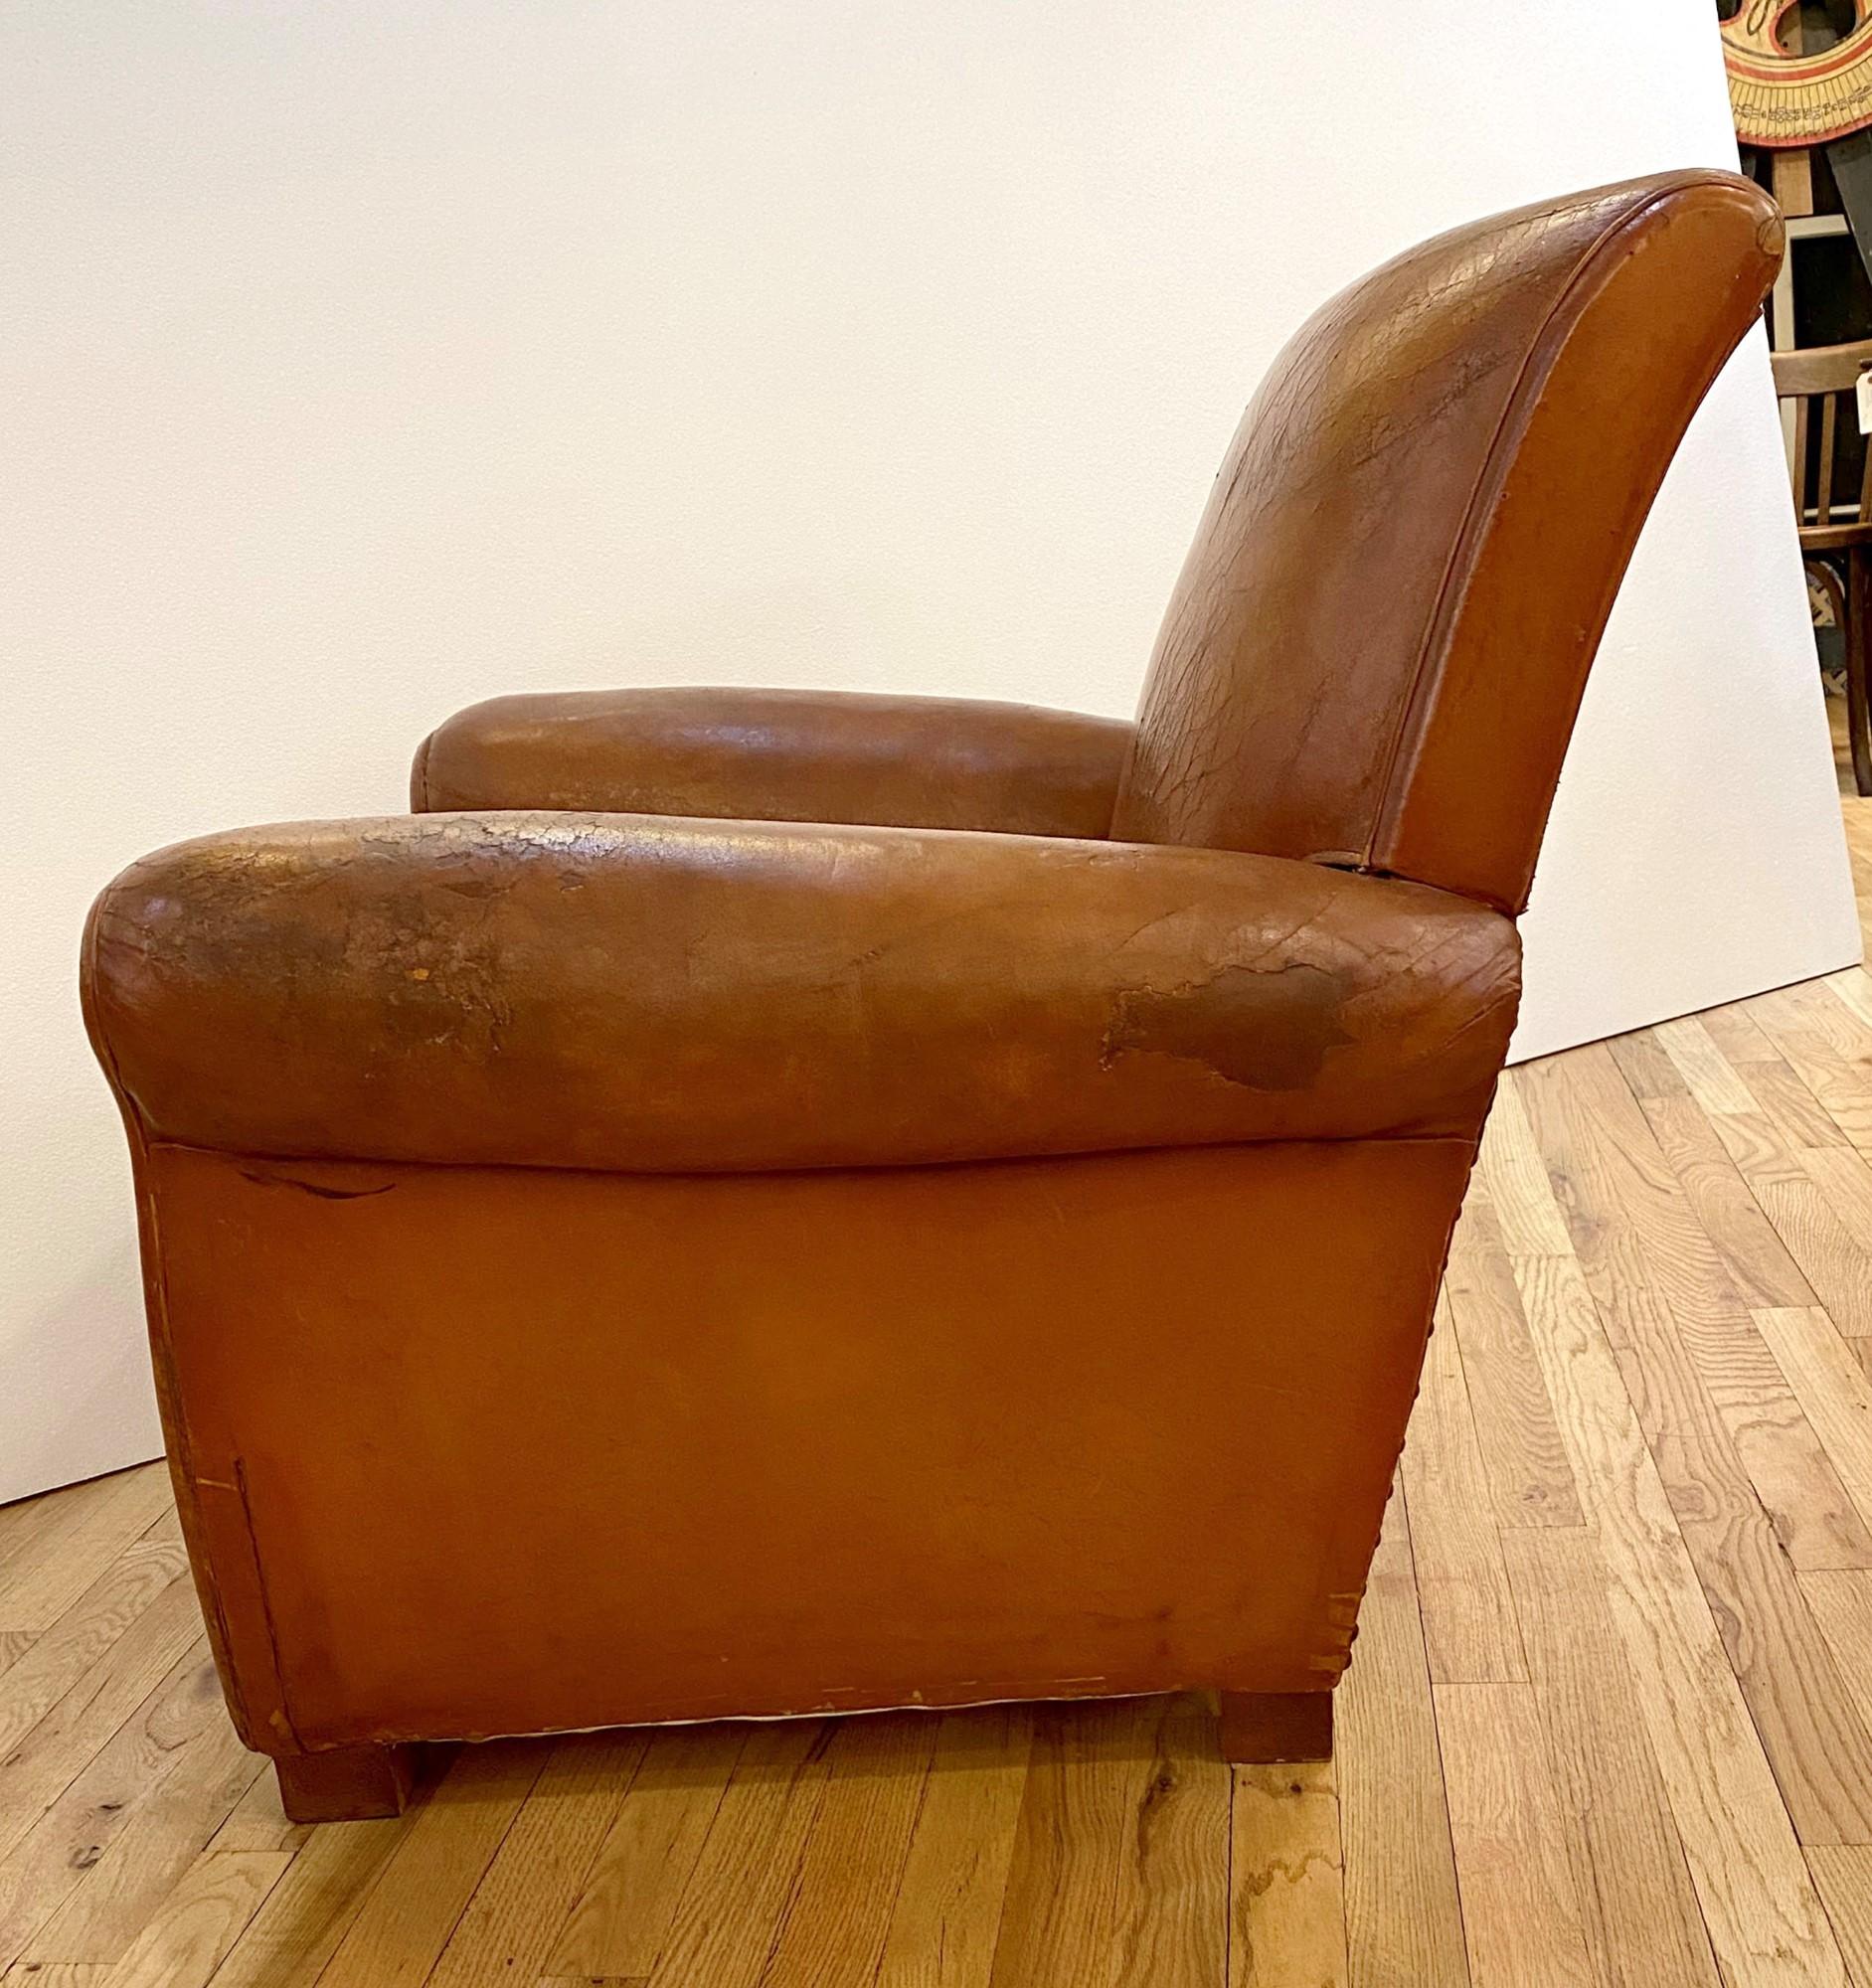 Single Vintage Art Deco French Brown Leather Club Chair 1